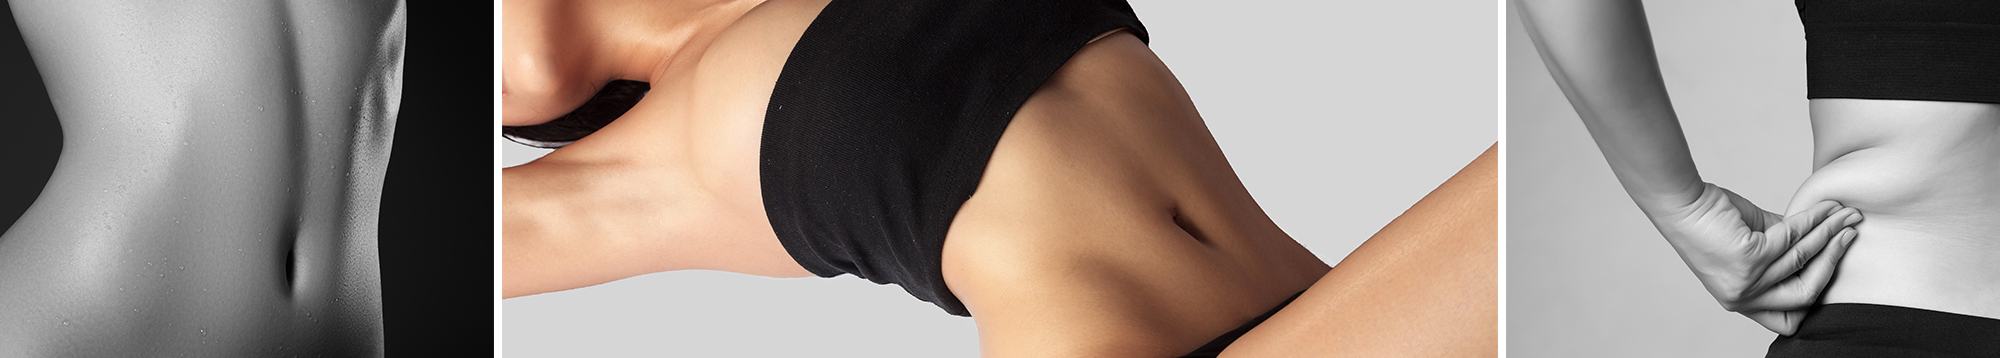 Body contouring surgery in Milwaukee